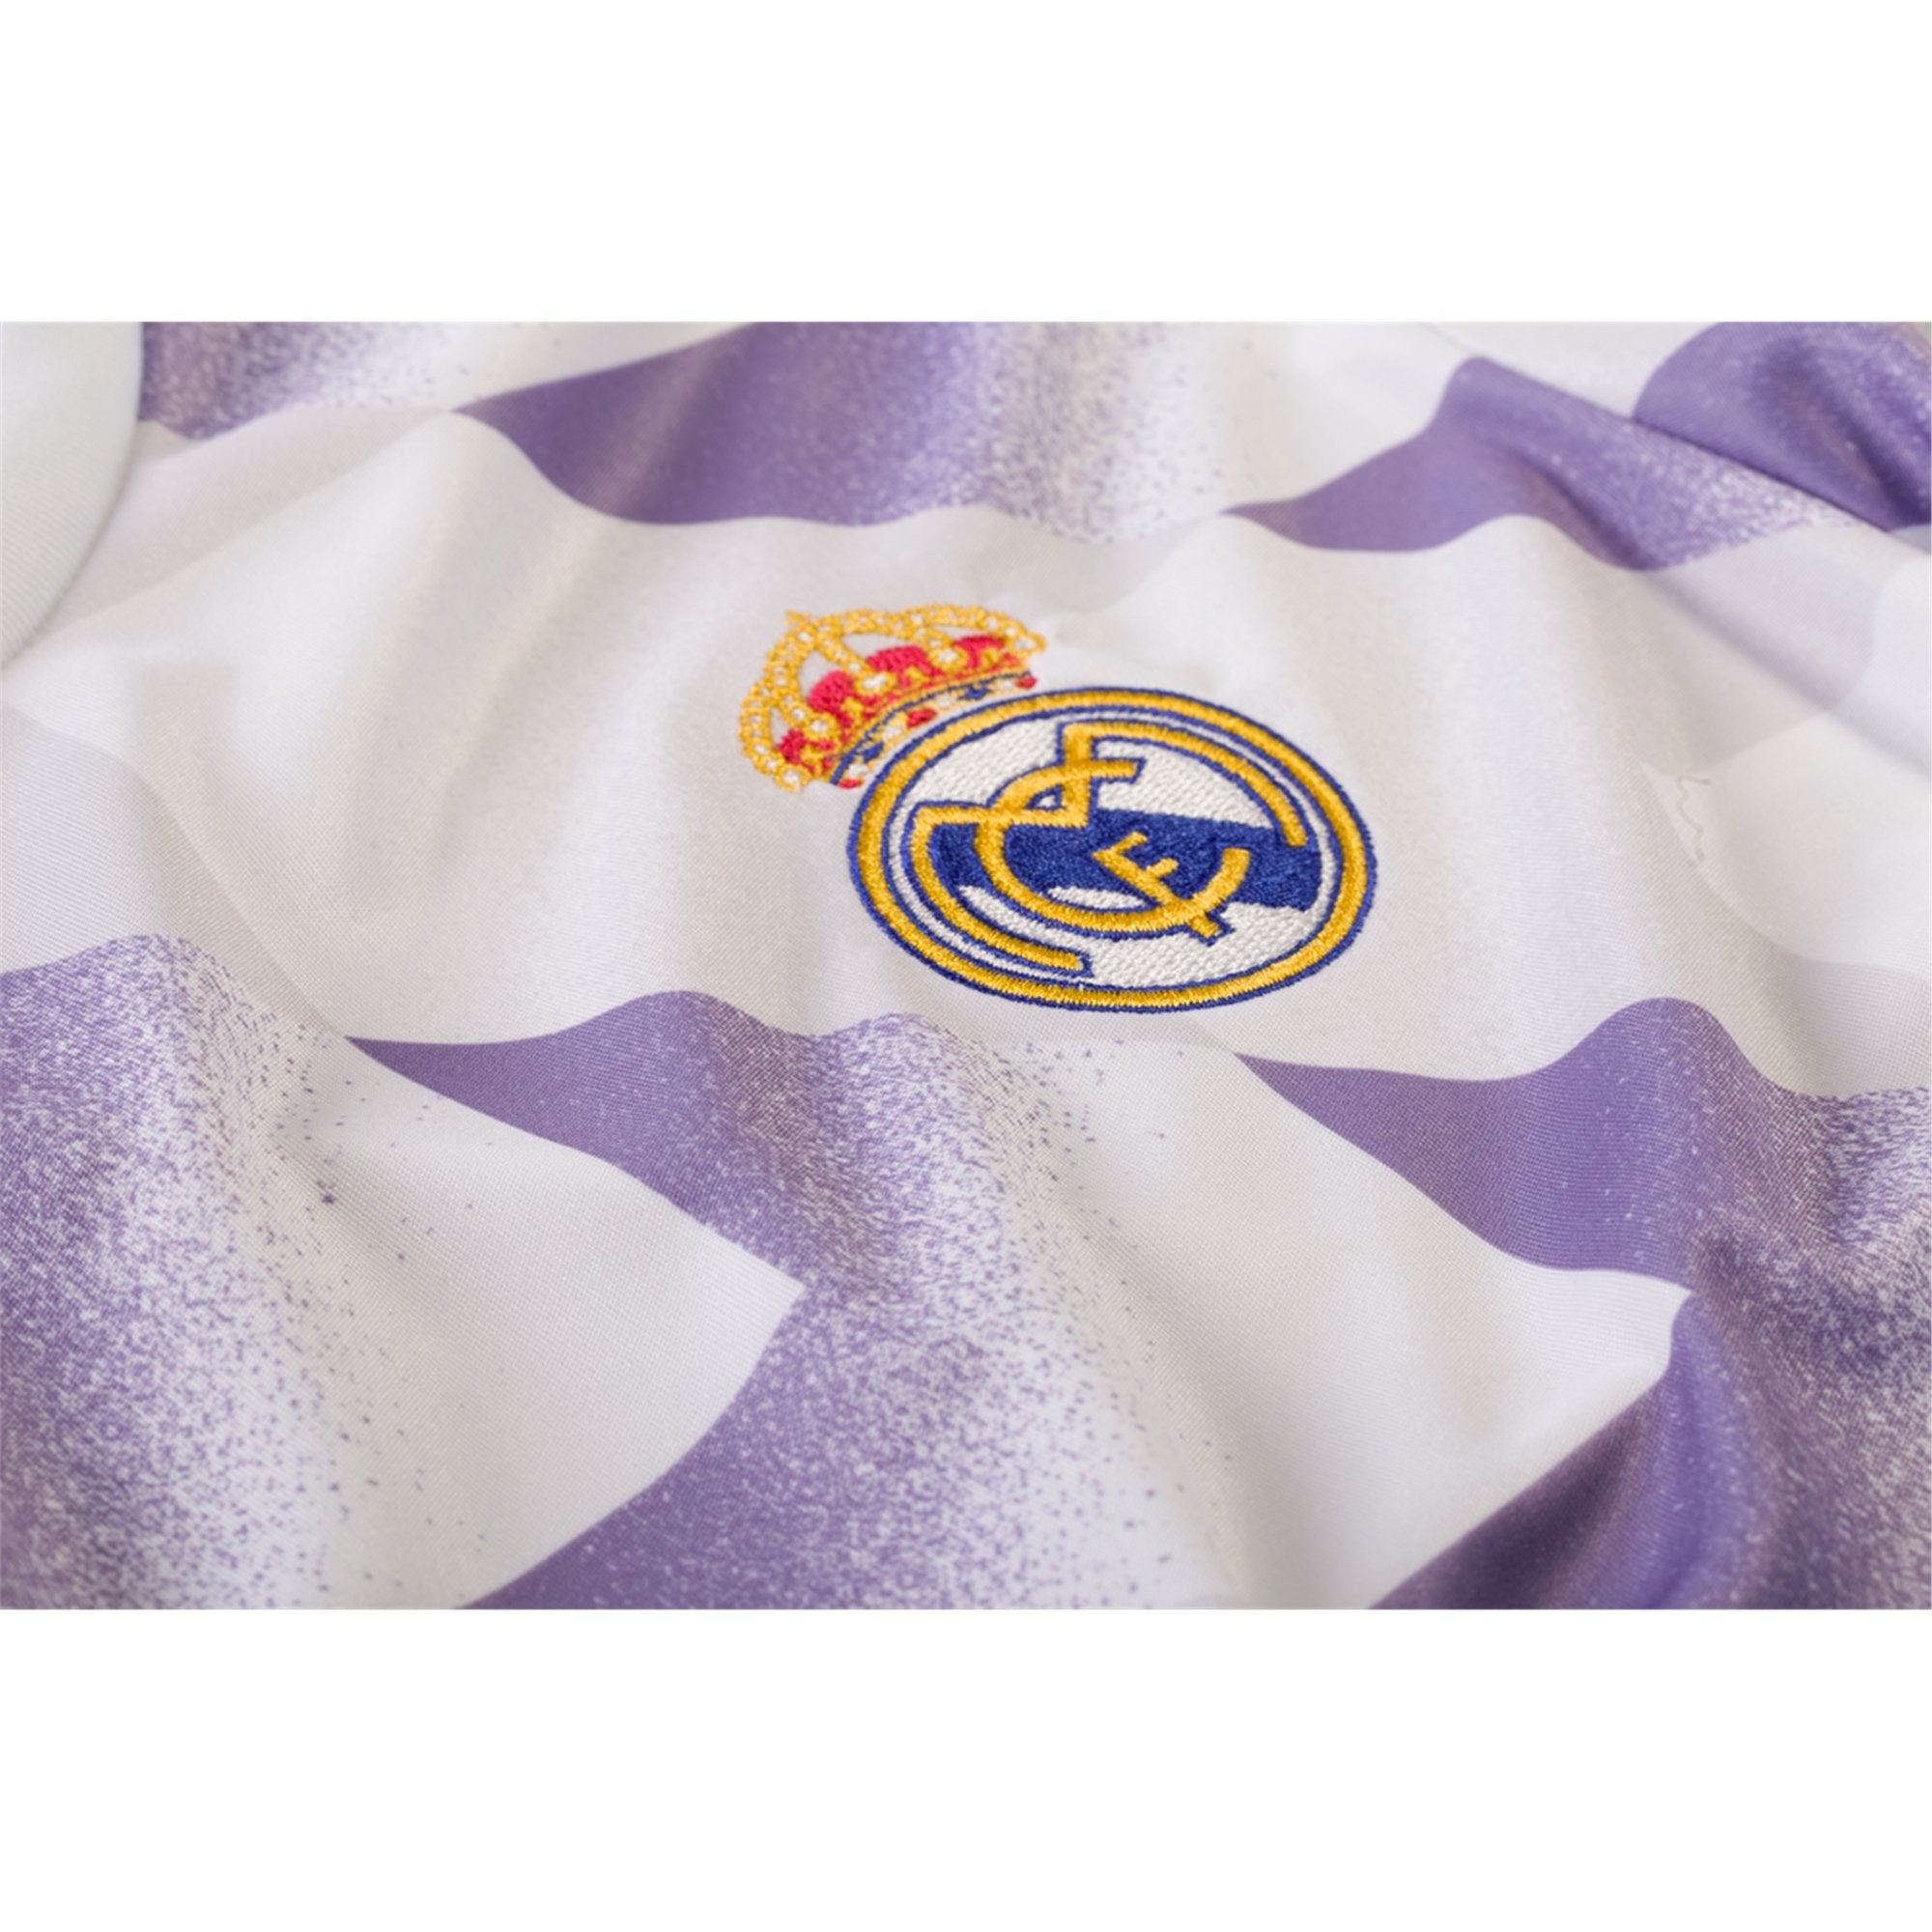 Adidas Real Madrid Pre-Match Jersey - White/Grey/Lilac - Size S